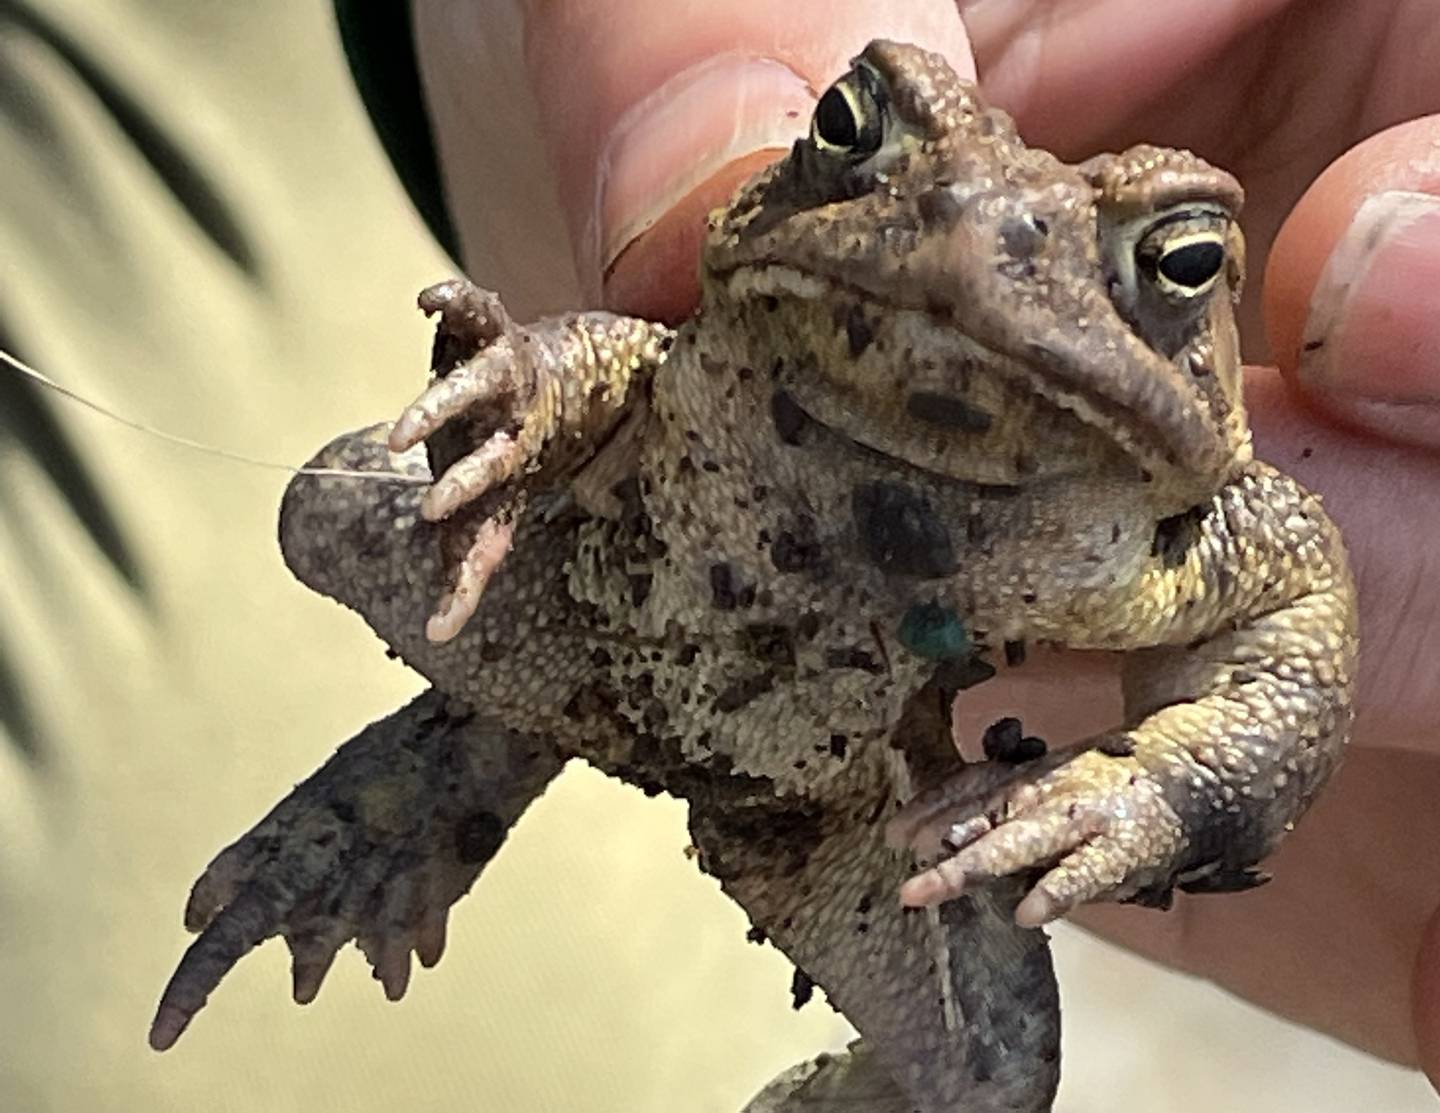 Lisa Lewenz holds up a single toad. As the “Grandee Toad Ferry,” she helps them migrate to their spawning grounds across a bust Baltimore County road.